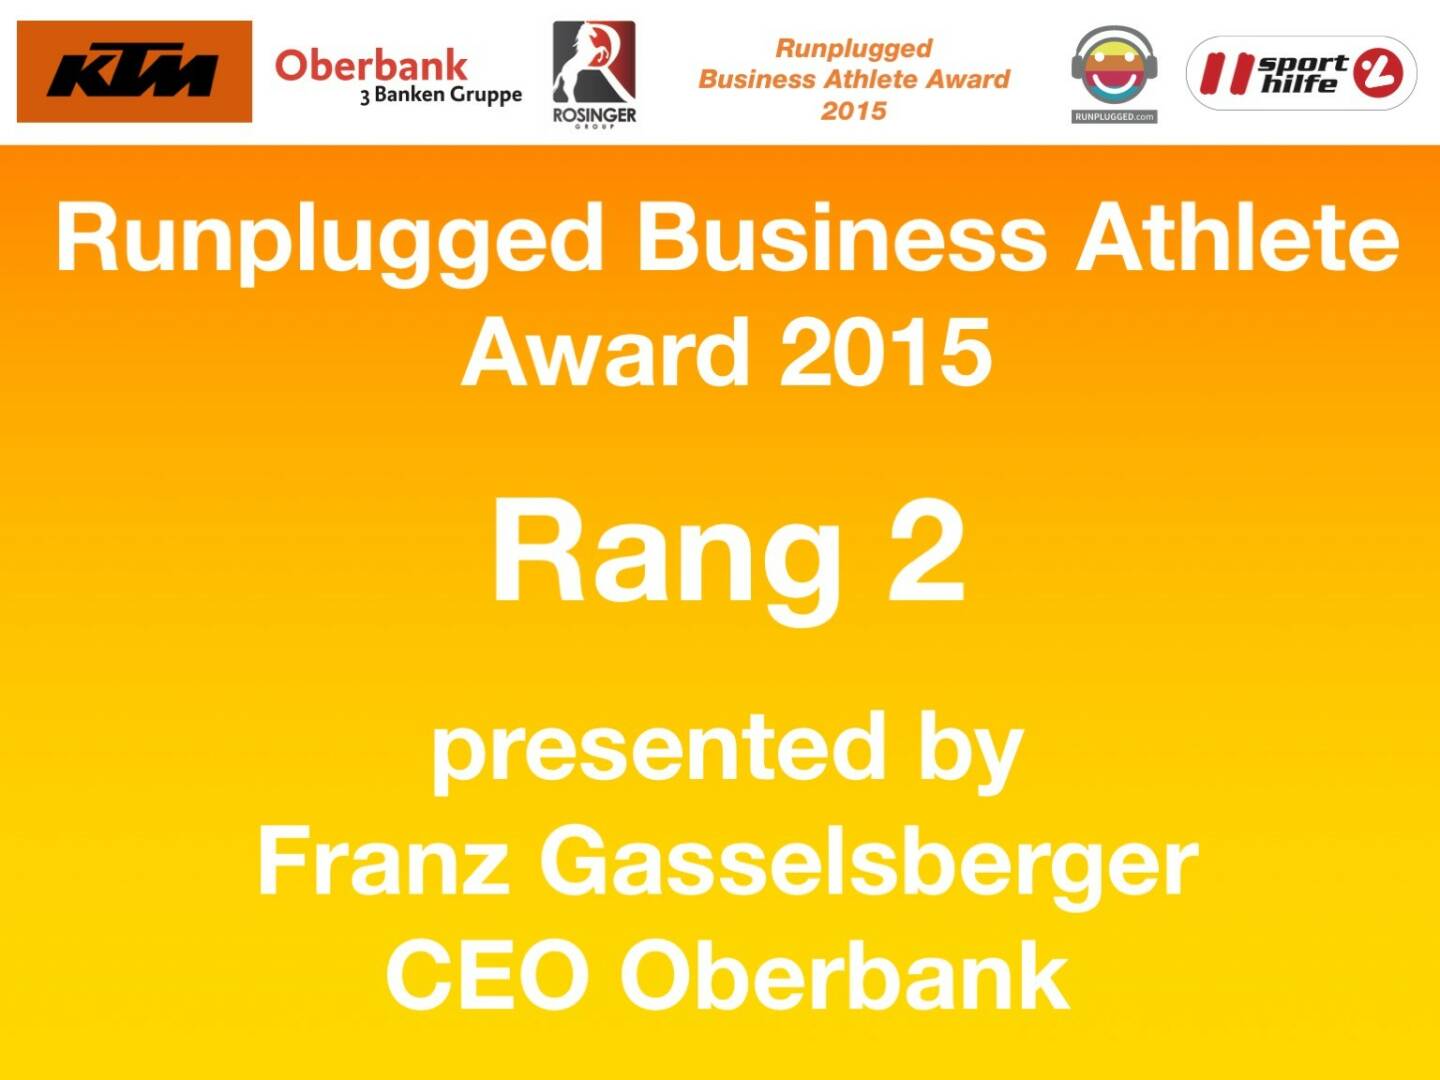 Runplugged Business Athlete Award 2015 Rang 2 presented by Franz Gasselsberger, CEO Oberbank